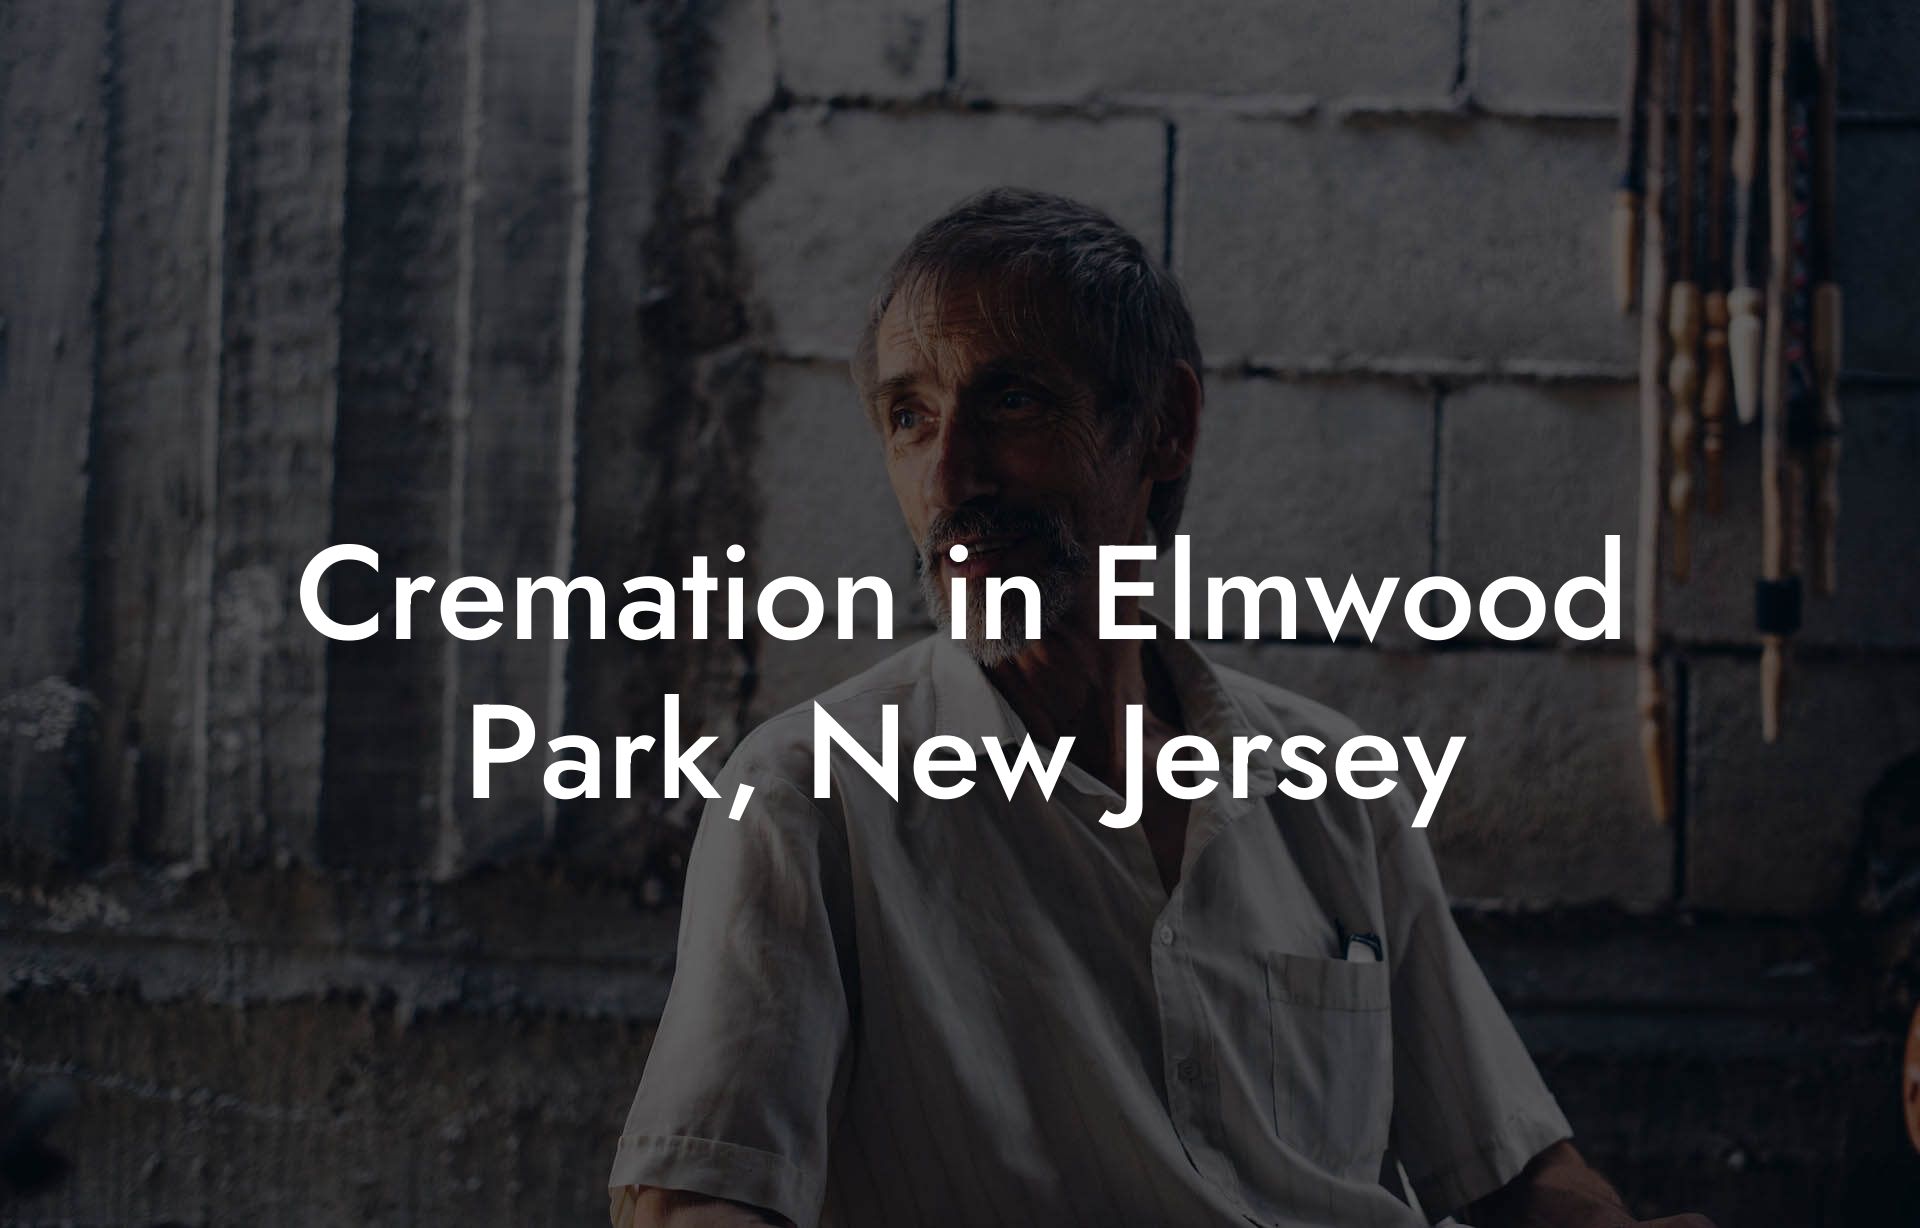 Cremation in Elmwood Park, New Jersey